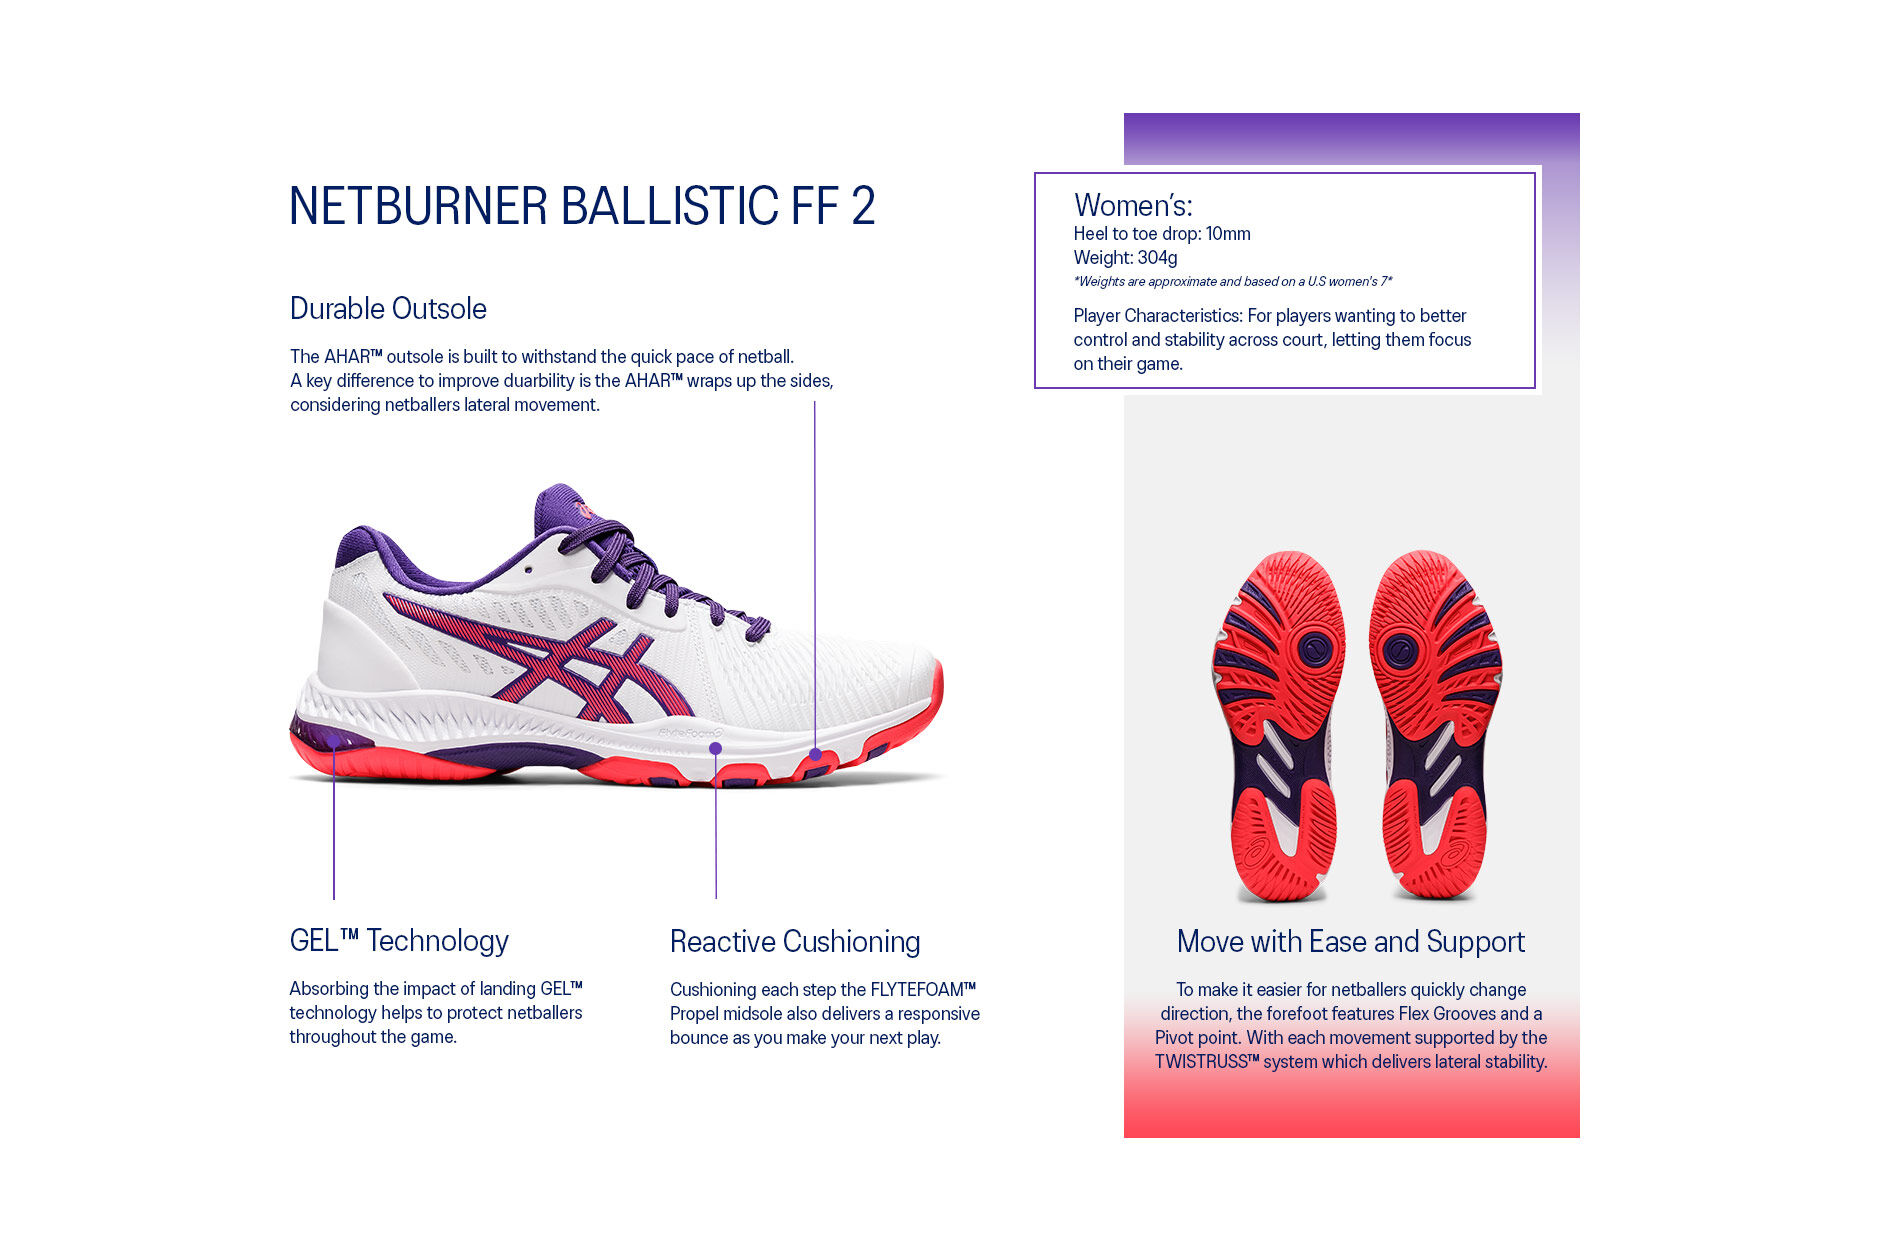 All Rounder Netball The Brand New 2019 Asics Netball Trainers Range Now  Available At All Rounder Netball! View The New Asics Netball Shoes Range  Here:- Trainers Containing A Brand New | colegioclubuniversitario.edu.ar